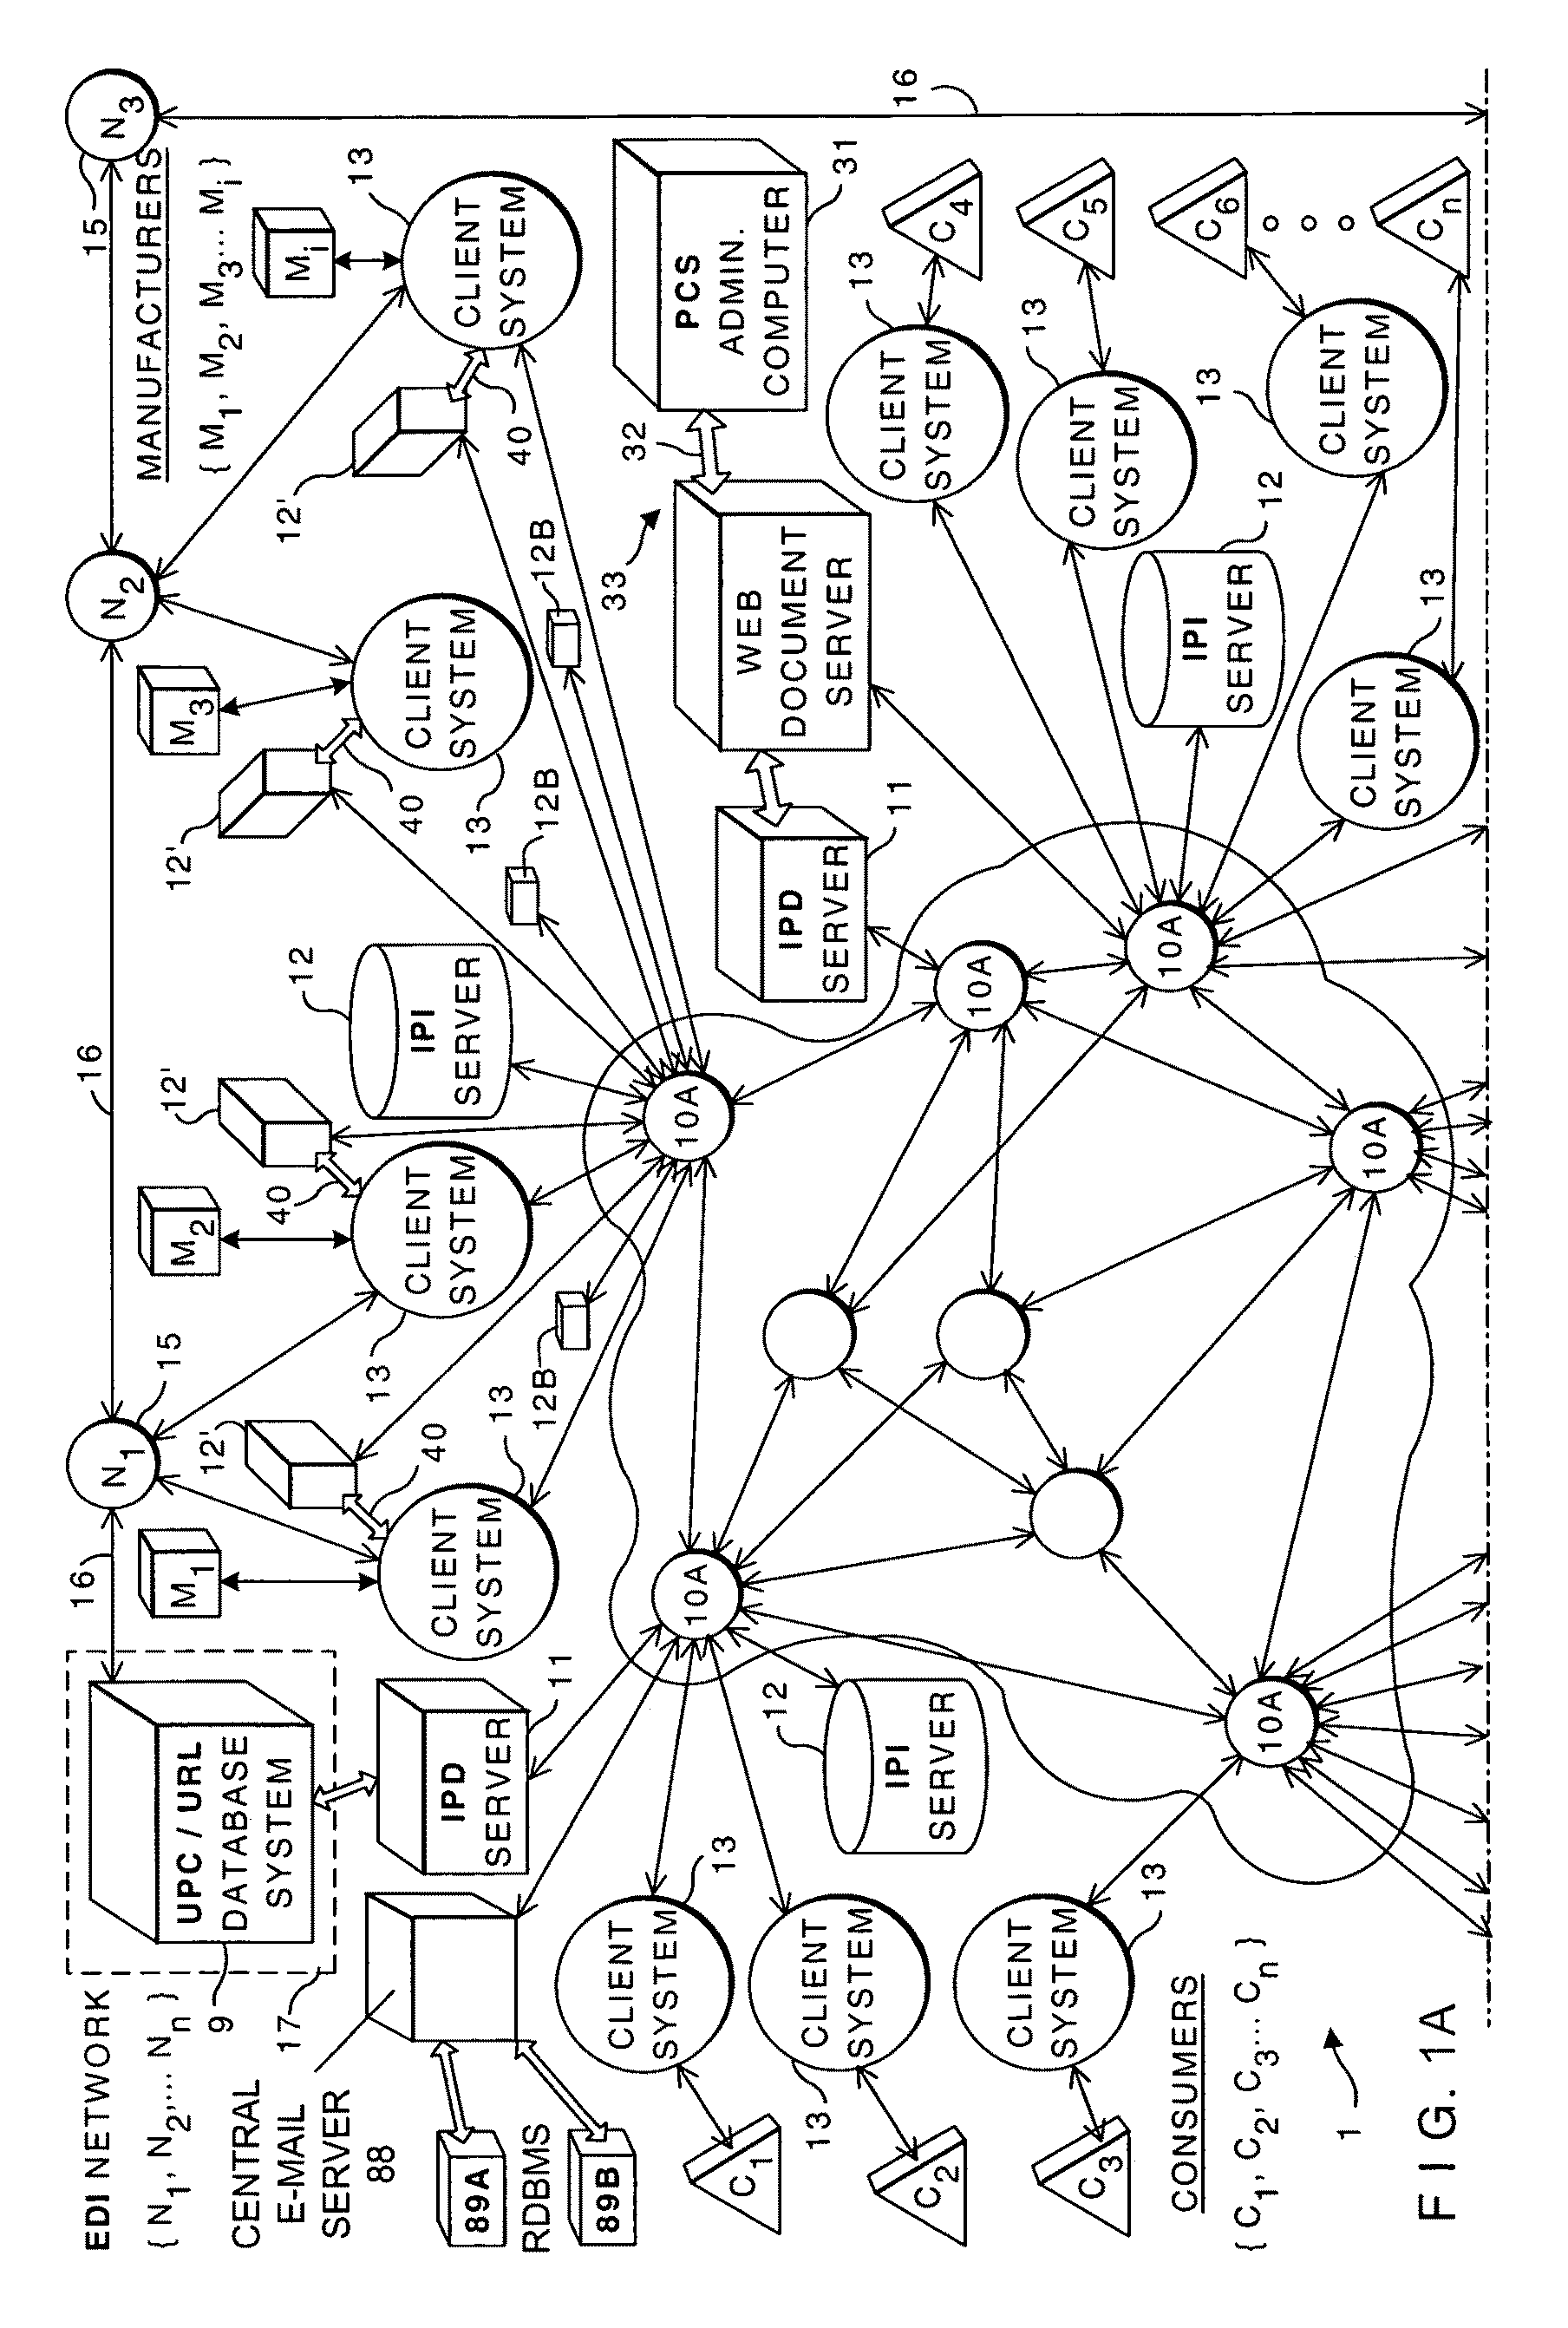 Internet-based product brand marketing communication network configured to allow members of a product brand management team to communicate directly with consumers browsing HTML-encoded pages at an electronic commerce (EC) enabled web-site along the fabric of the world wide web (WWW), using programable multi-mode virtual kiosks (MMVKS) driven by server-side components and managed by product brand management team members